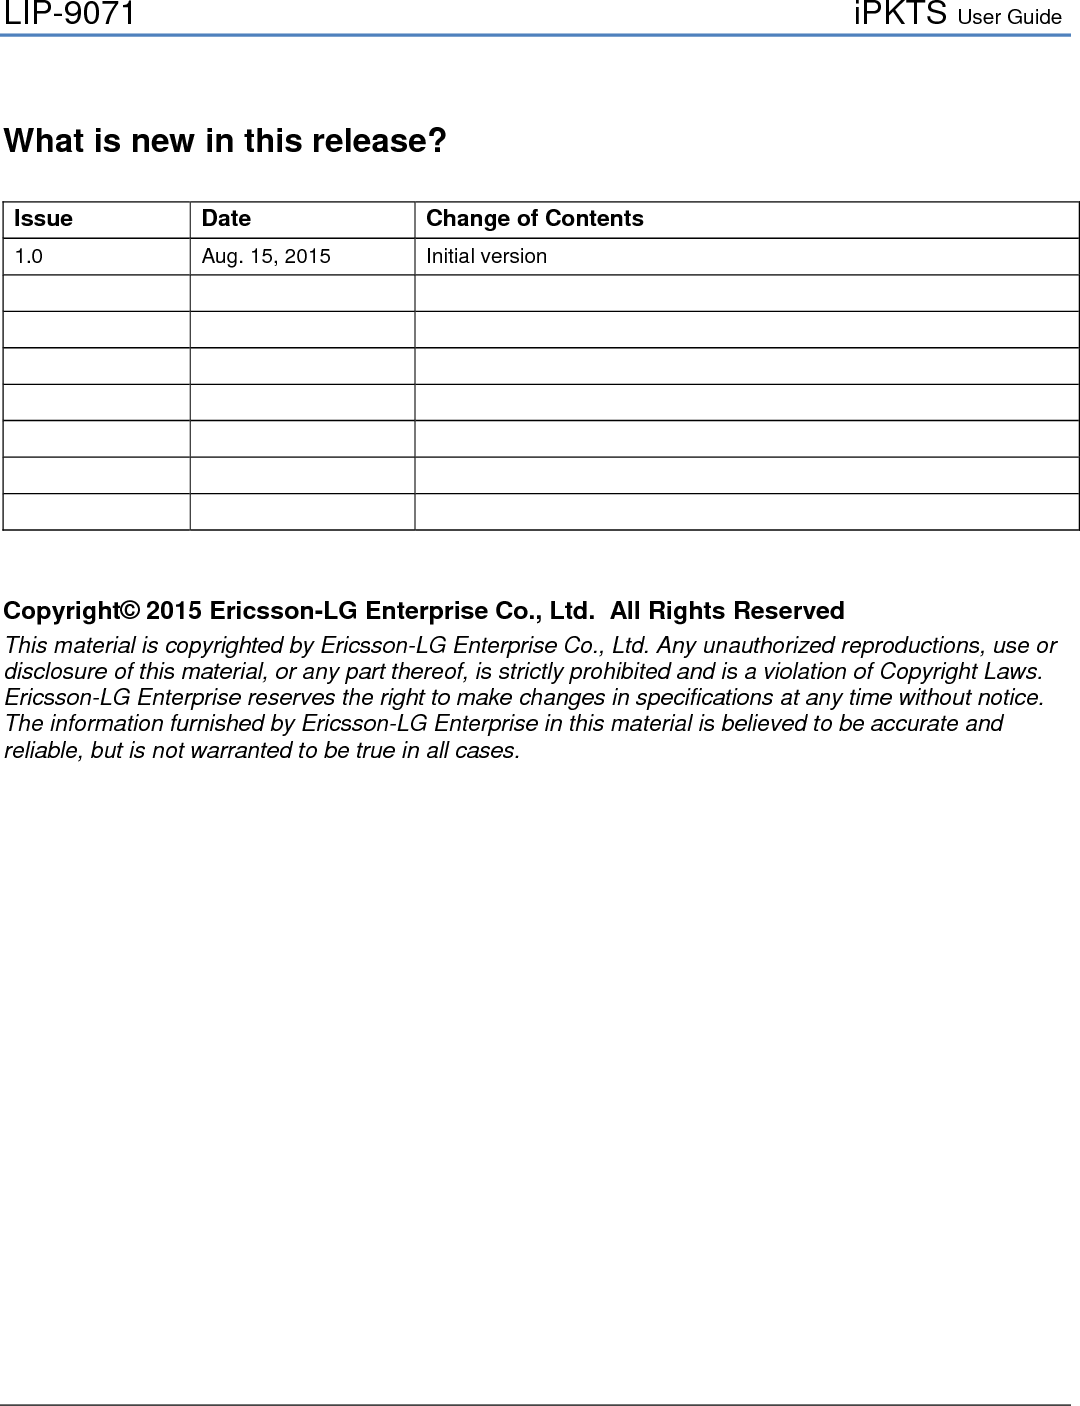 LIP-9071     iPKTS User Guide    What is new in this release?  Issue Date Change of Contents 1.0  Aug. 15, 2015  Initial version                                      Copyright© 2015 Ericsson-LG Enterprise Co., Ltd.  All Rights Reserved This material is copyrighted by Ericsson-LG Enterprise Co., Ltd. Any unauthorized reproductions, use or disclosure of this material, or any part thereof, is strictly prohibited and is a violation of Copyright Laws. Ericsson-LG Enterprise reserves the right to make changes in specifications at any time without notice. The information furnished by Ericsson-LG Enterprise in this material is believed to be accurate and reliable, but is not warranted to be true in all cases.                      